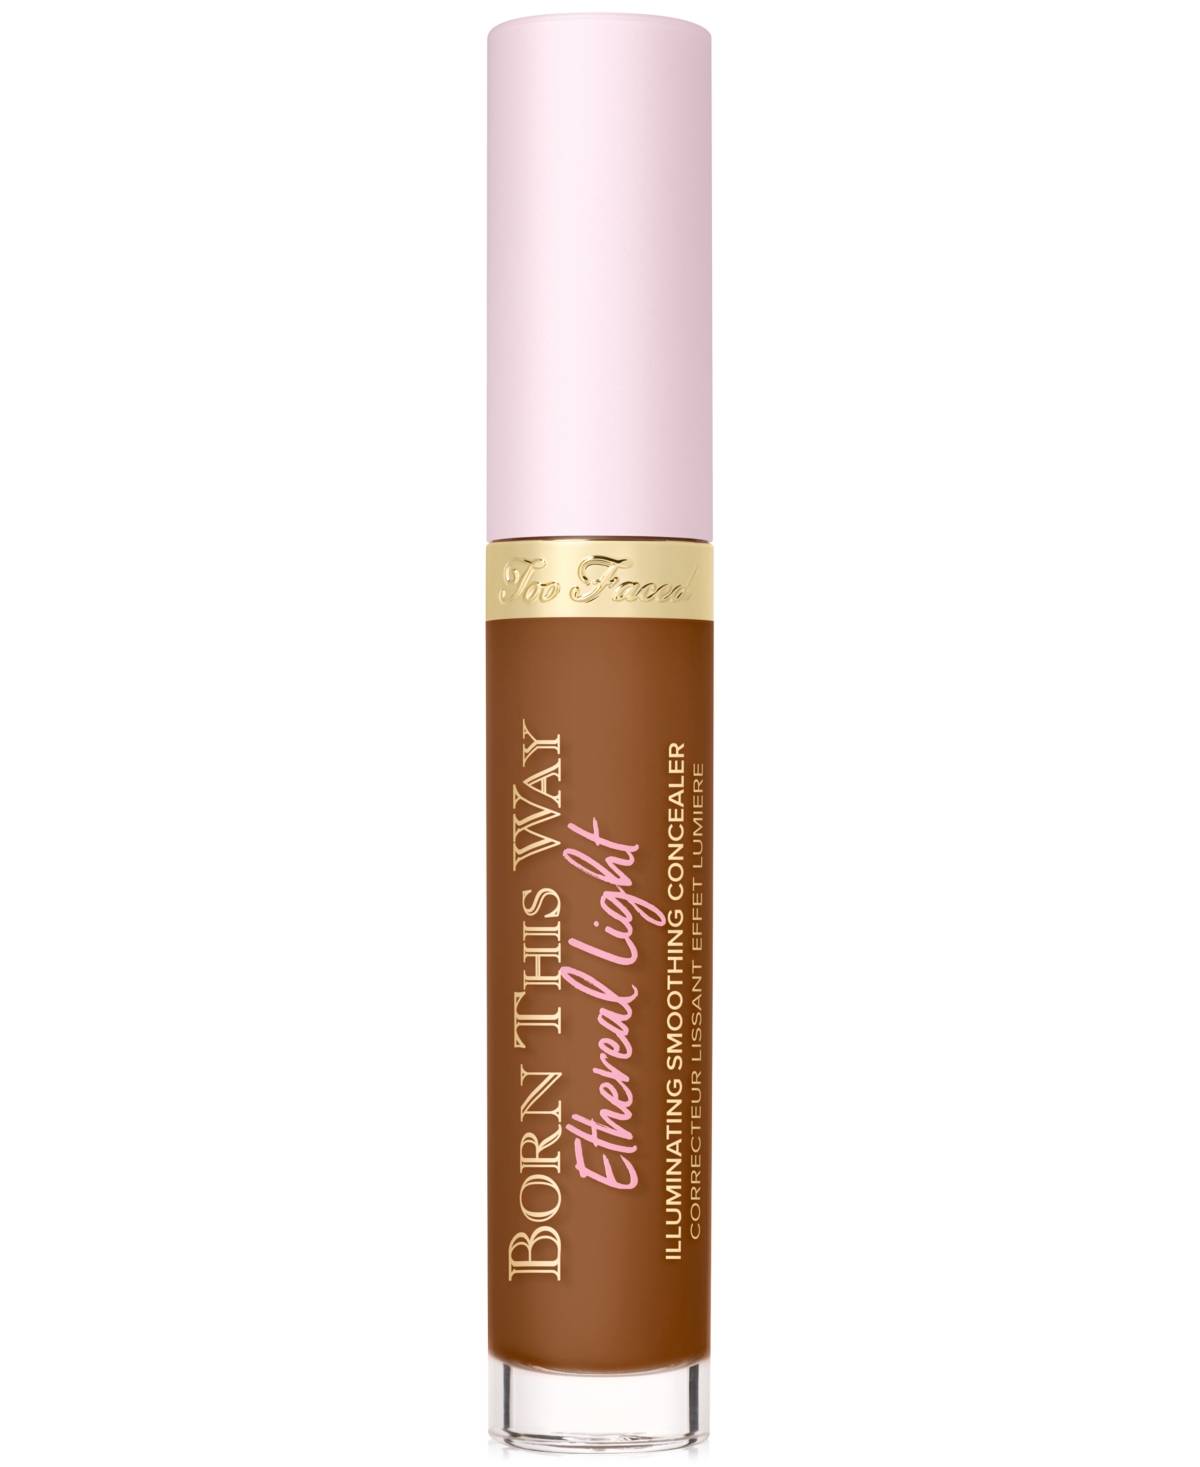 Too Faced Born This Way Ethereal Light Illuminating Smoothing Concealer In Hot Cocoa - Very Deep With Golden Undert